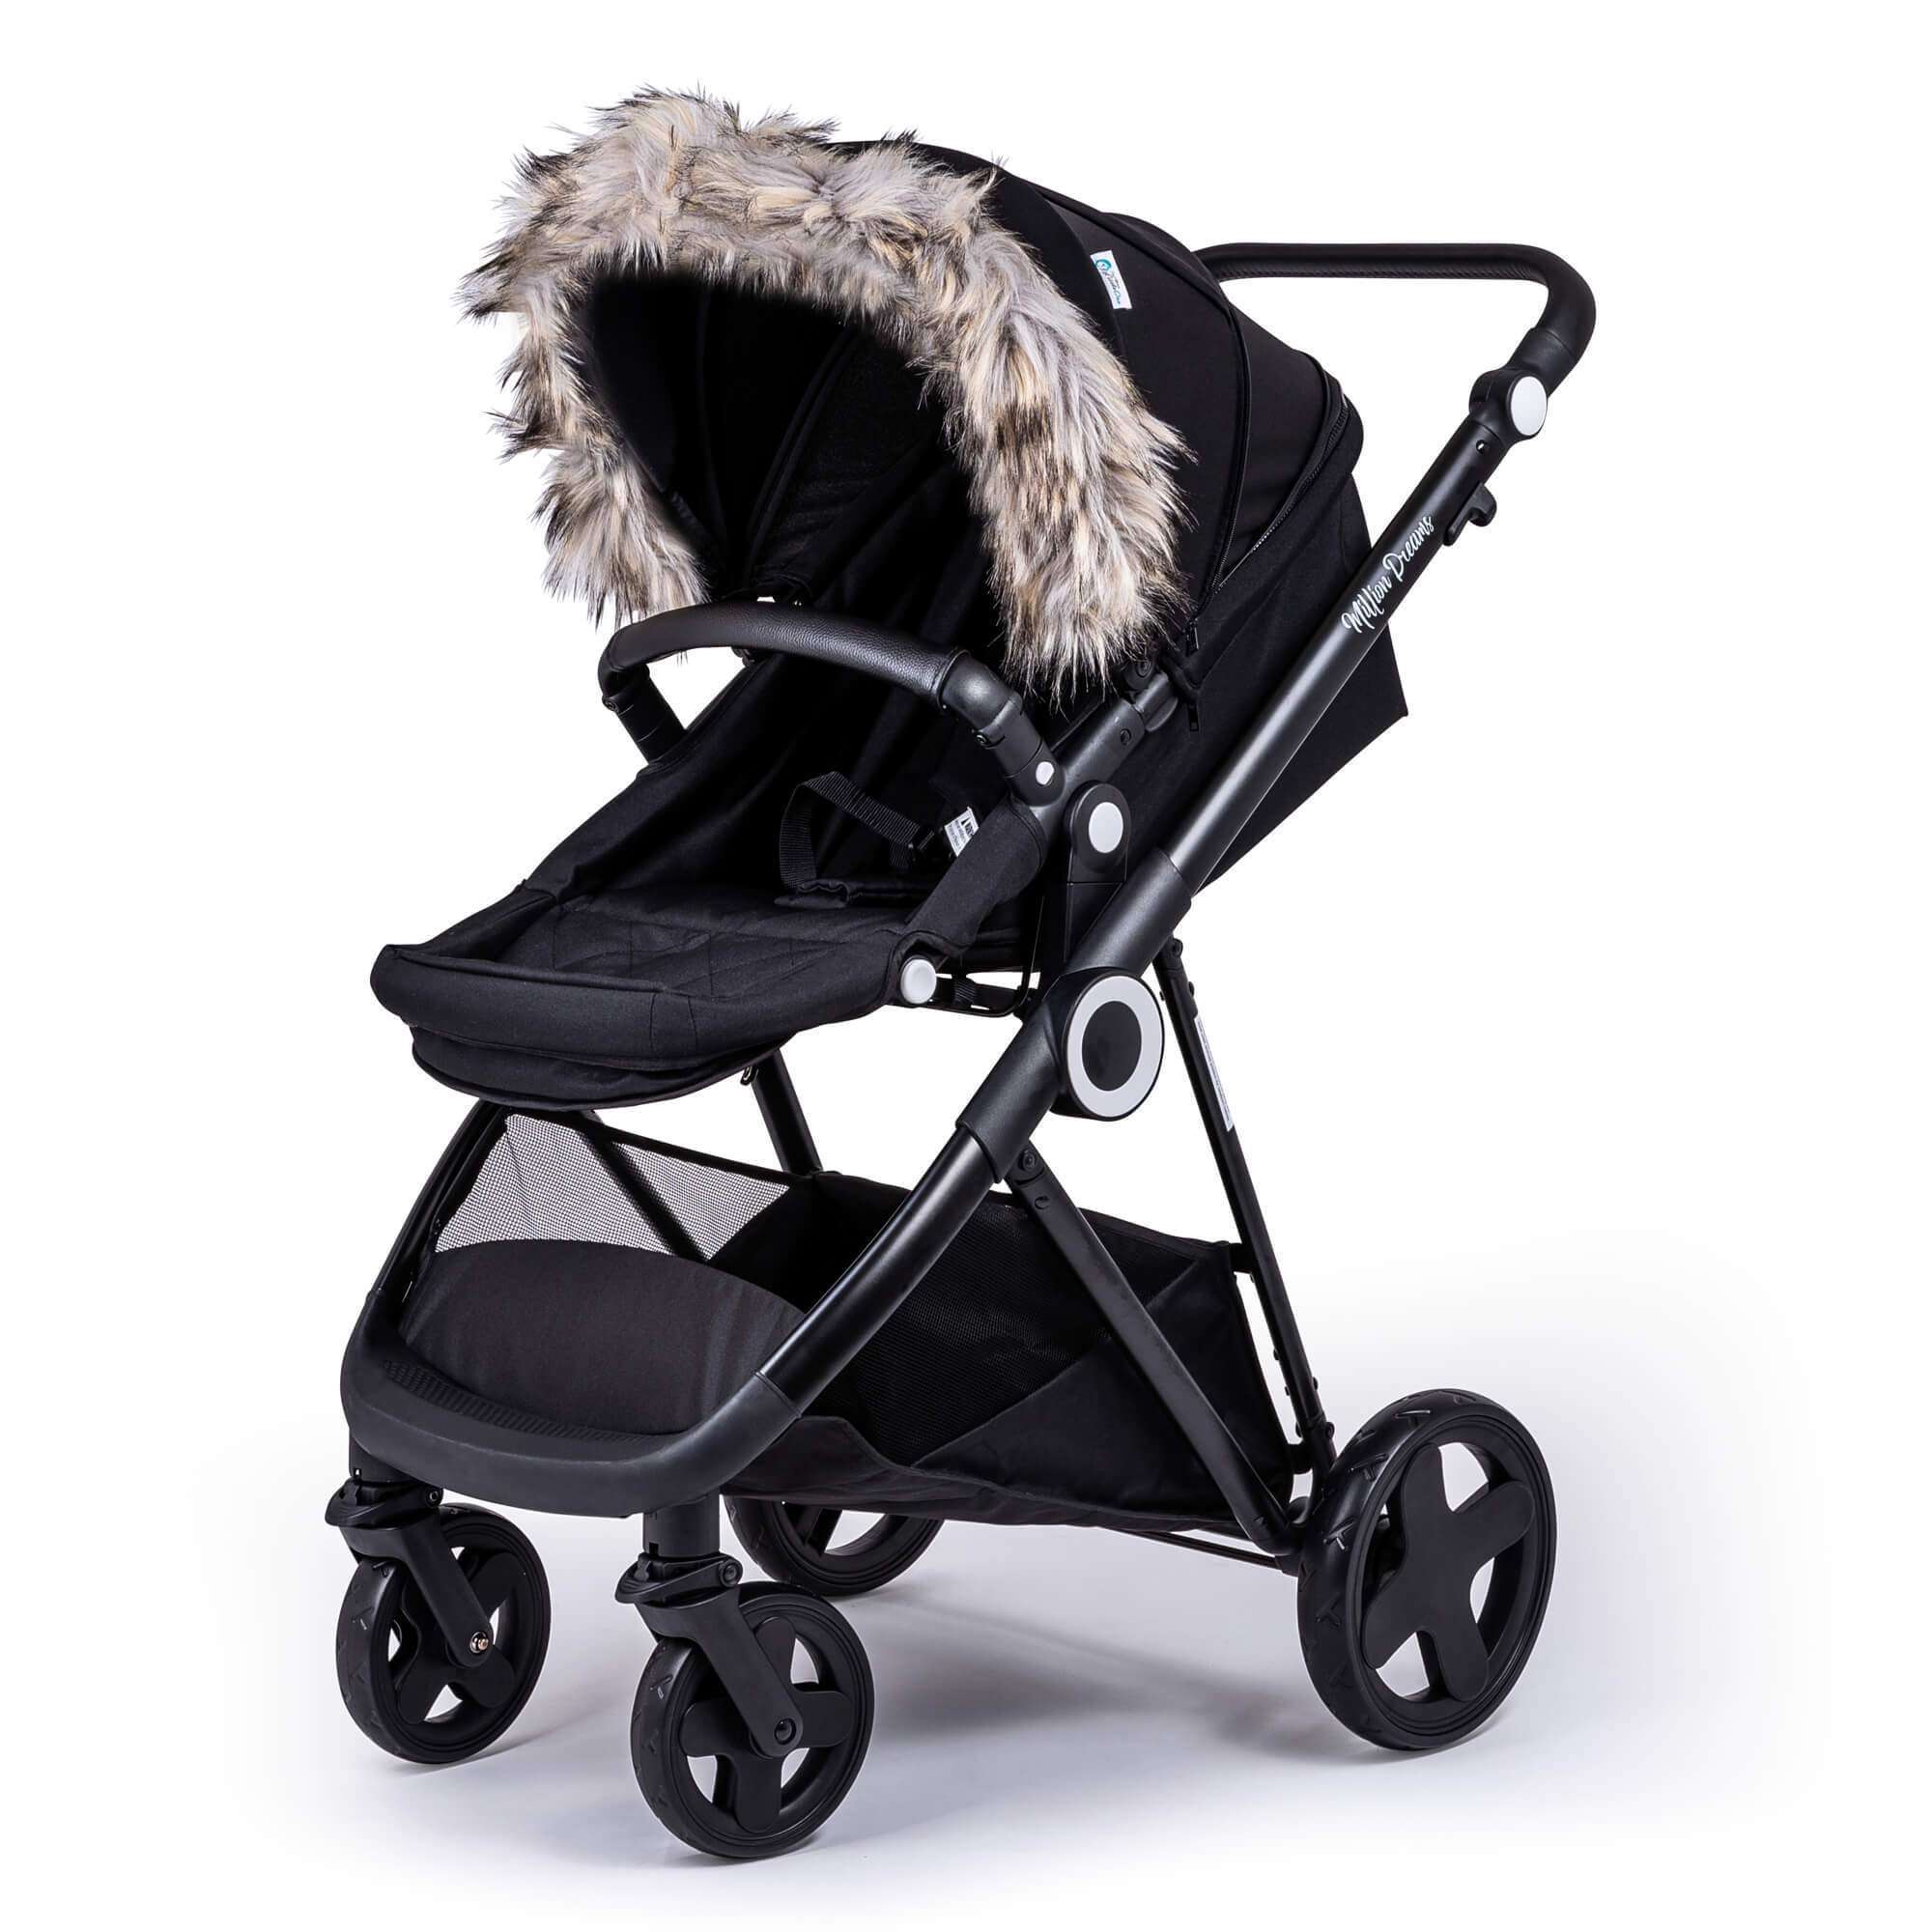 Pram Fur Hood Trim Attachment For Pushchair Compatible with Infababy - Light Grey / Fits All Models | For Your Little One